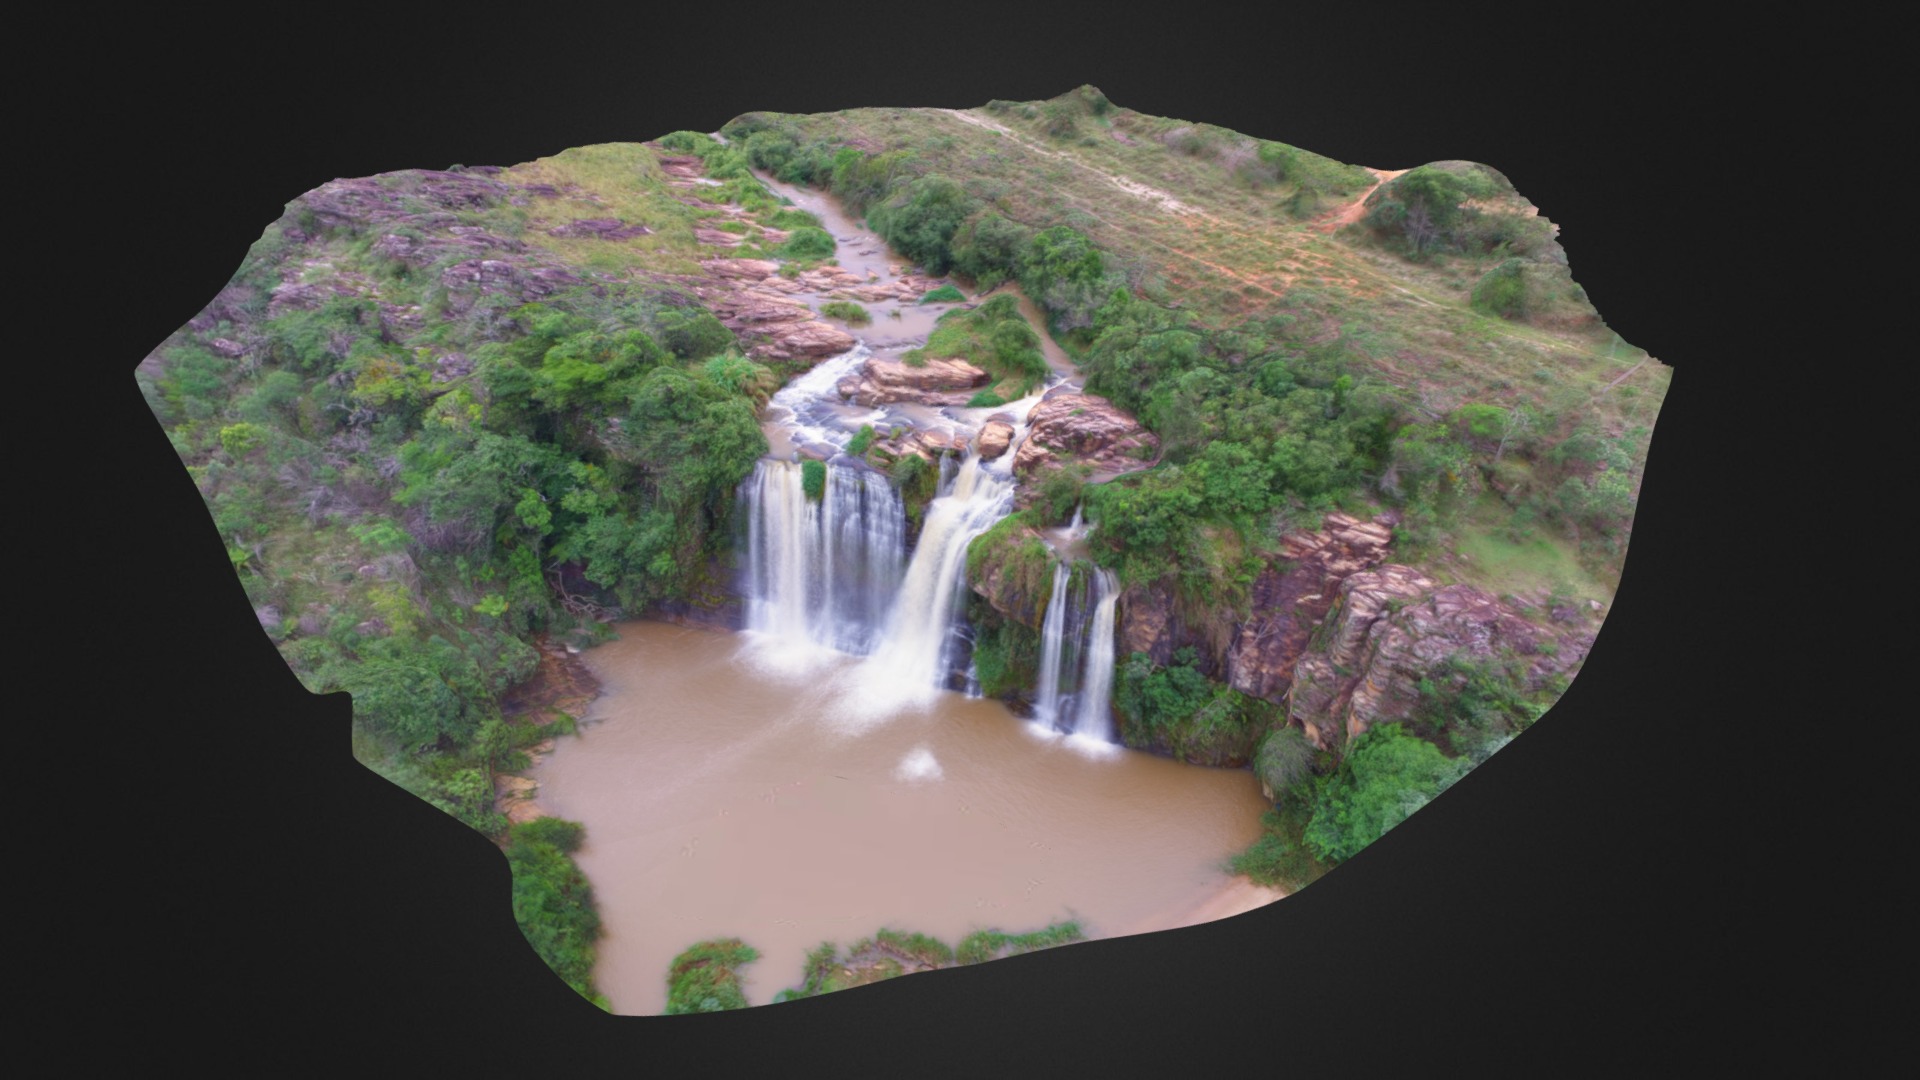 3D model Cachoeira da Fumaça – Carrancas – MG - This is a 3D model of the Cachoeira da Fumaça - Carrancas - MG. The 3D model is about a waterfall in a rocky area.